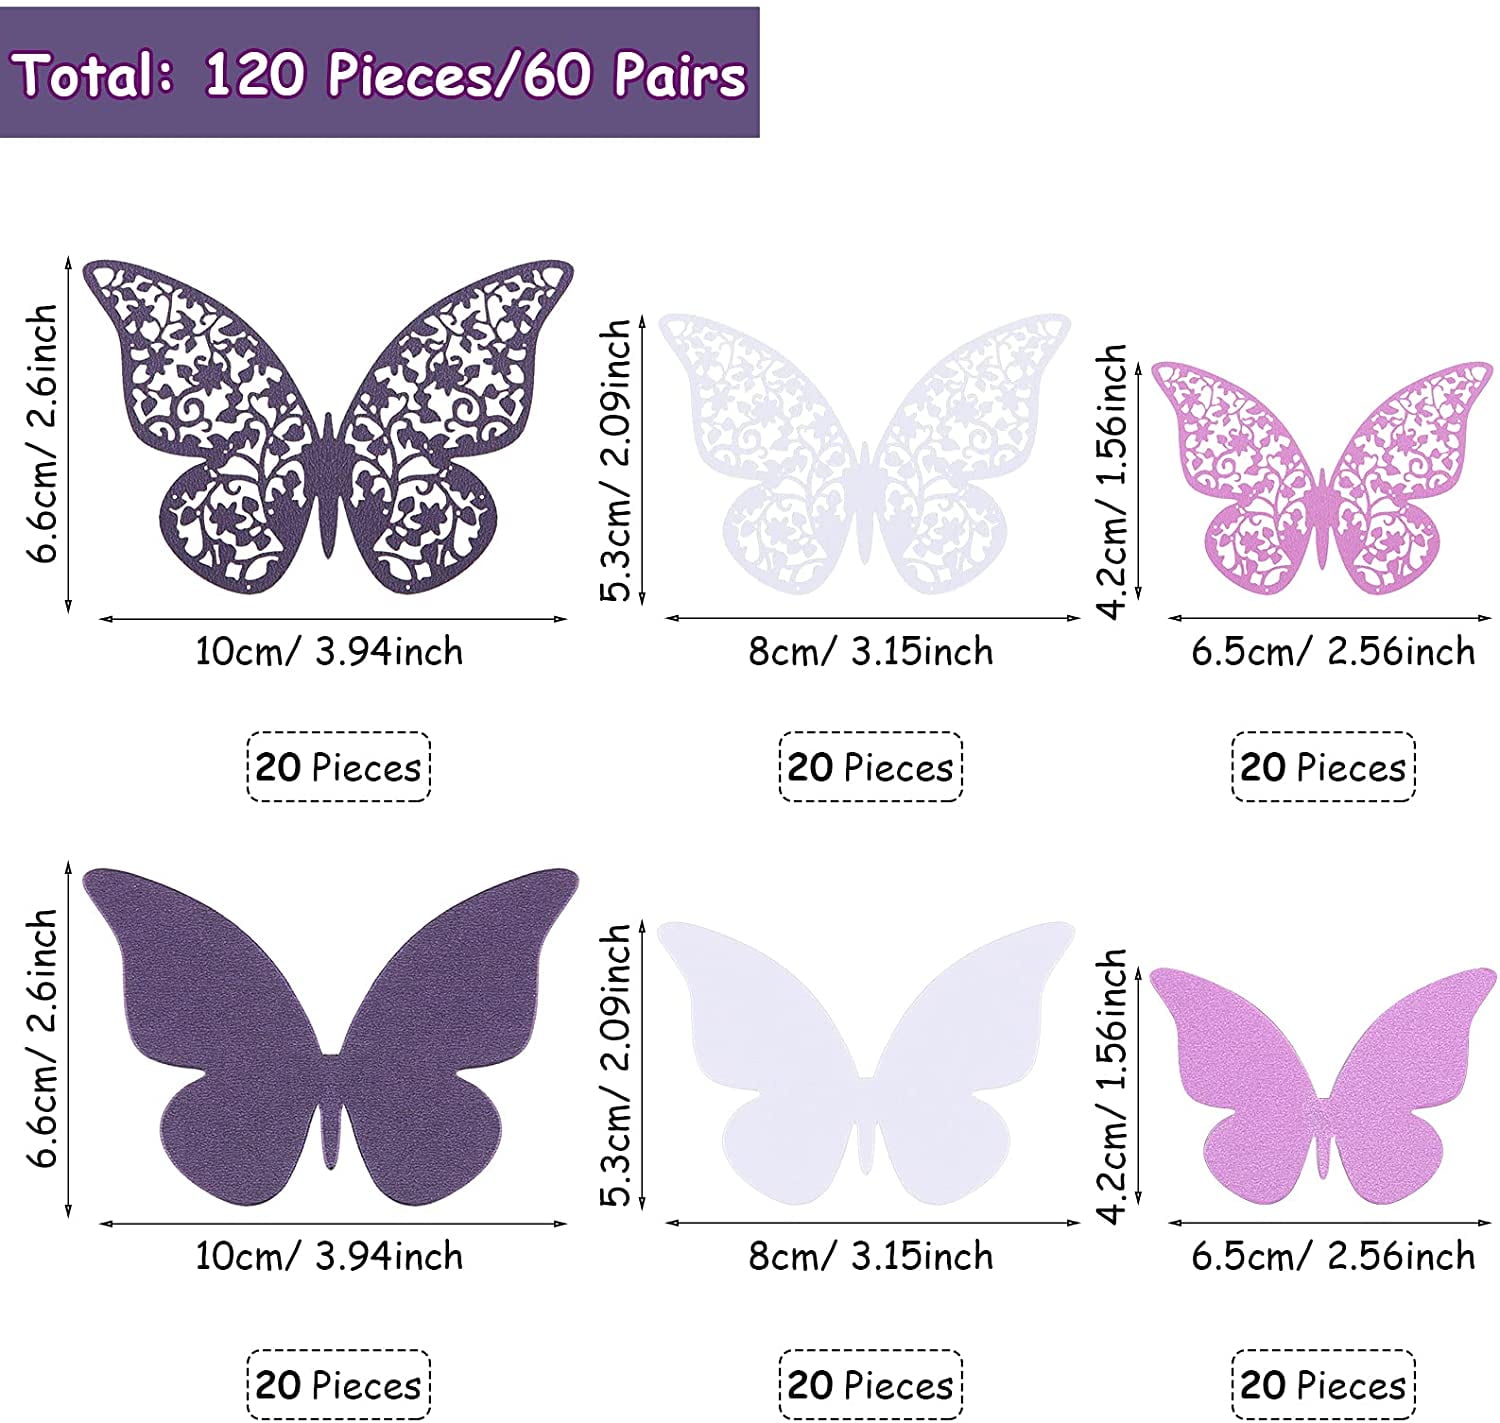 120 Pieces 60 Pairs 3D Layered Butterfly Wall Decor Removable Butterfly Stickers Hollow Mural Decals DIY Decorative Wall Art Crafts for Baby Room Home Wedding Decor Pink 